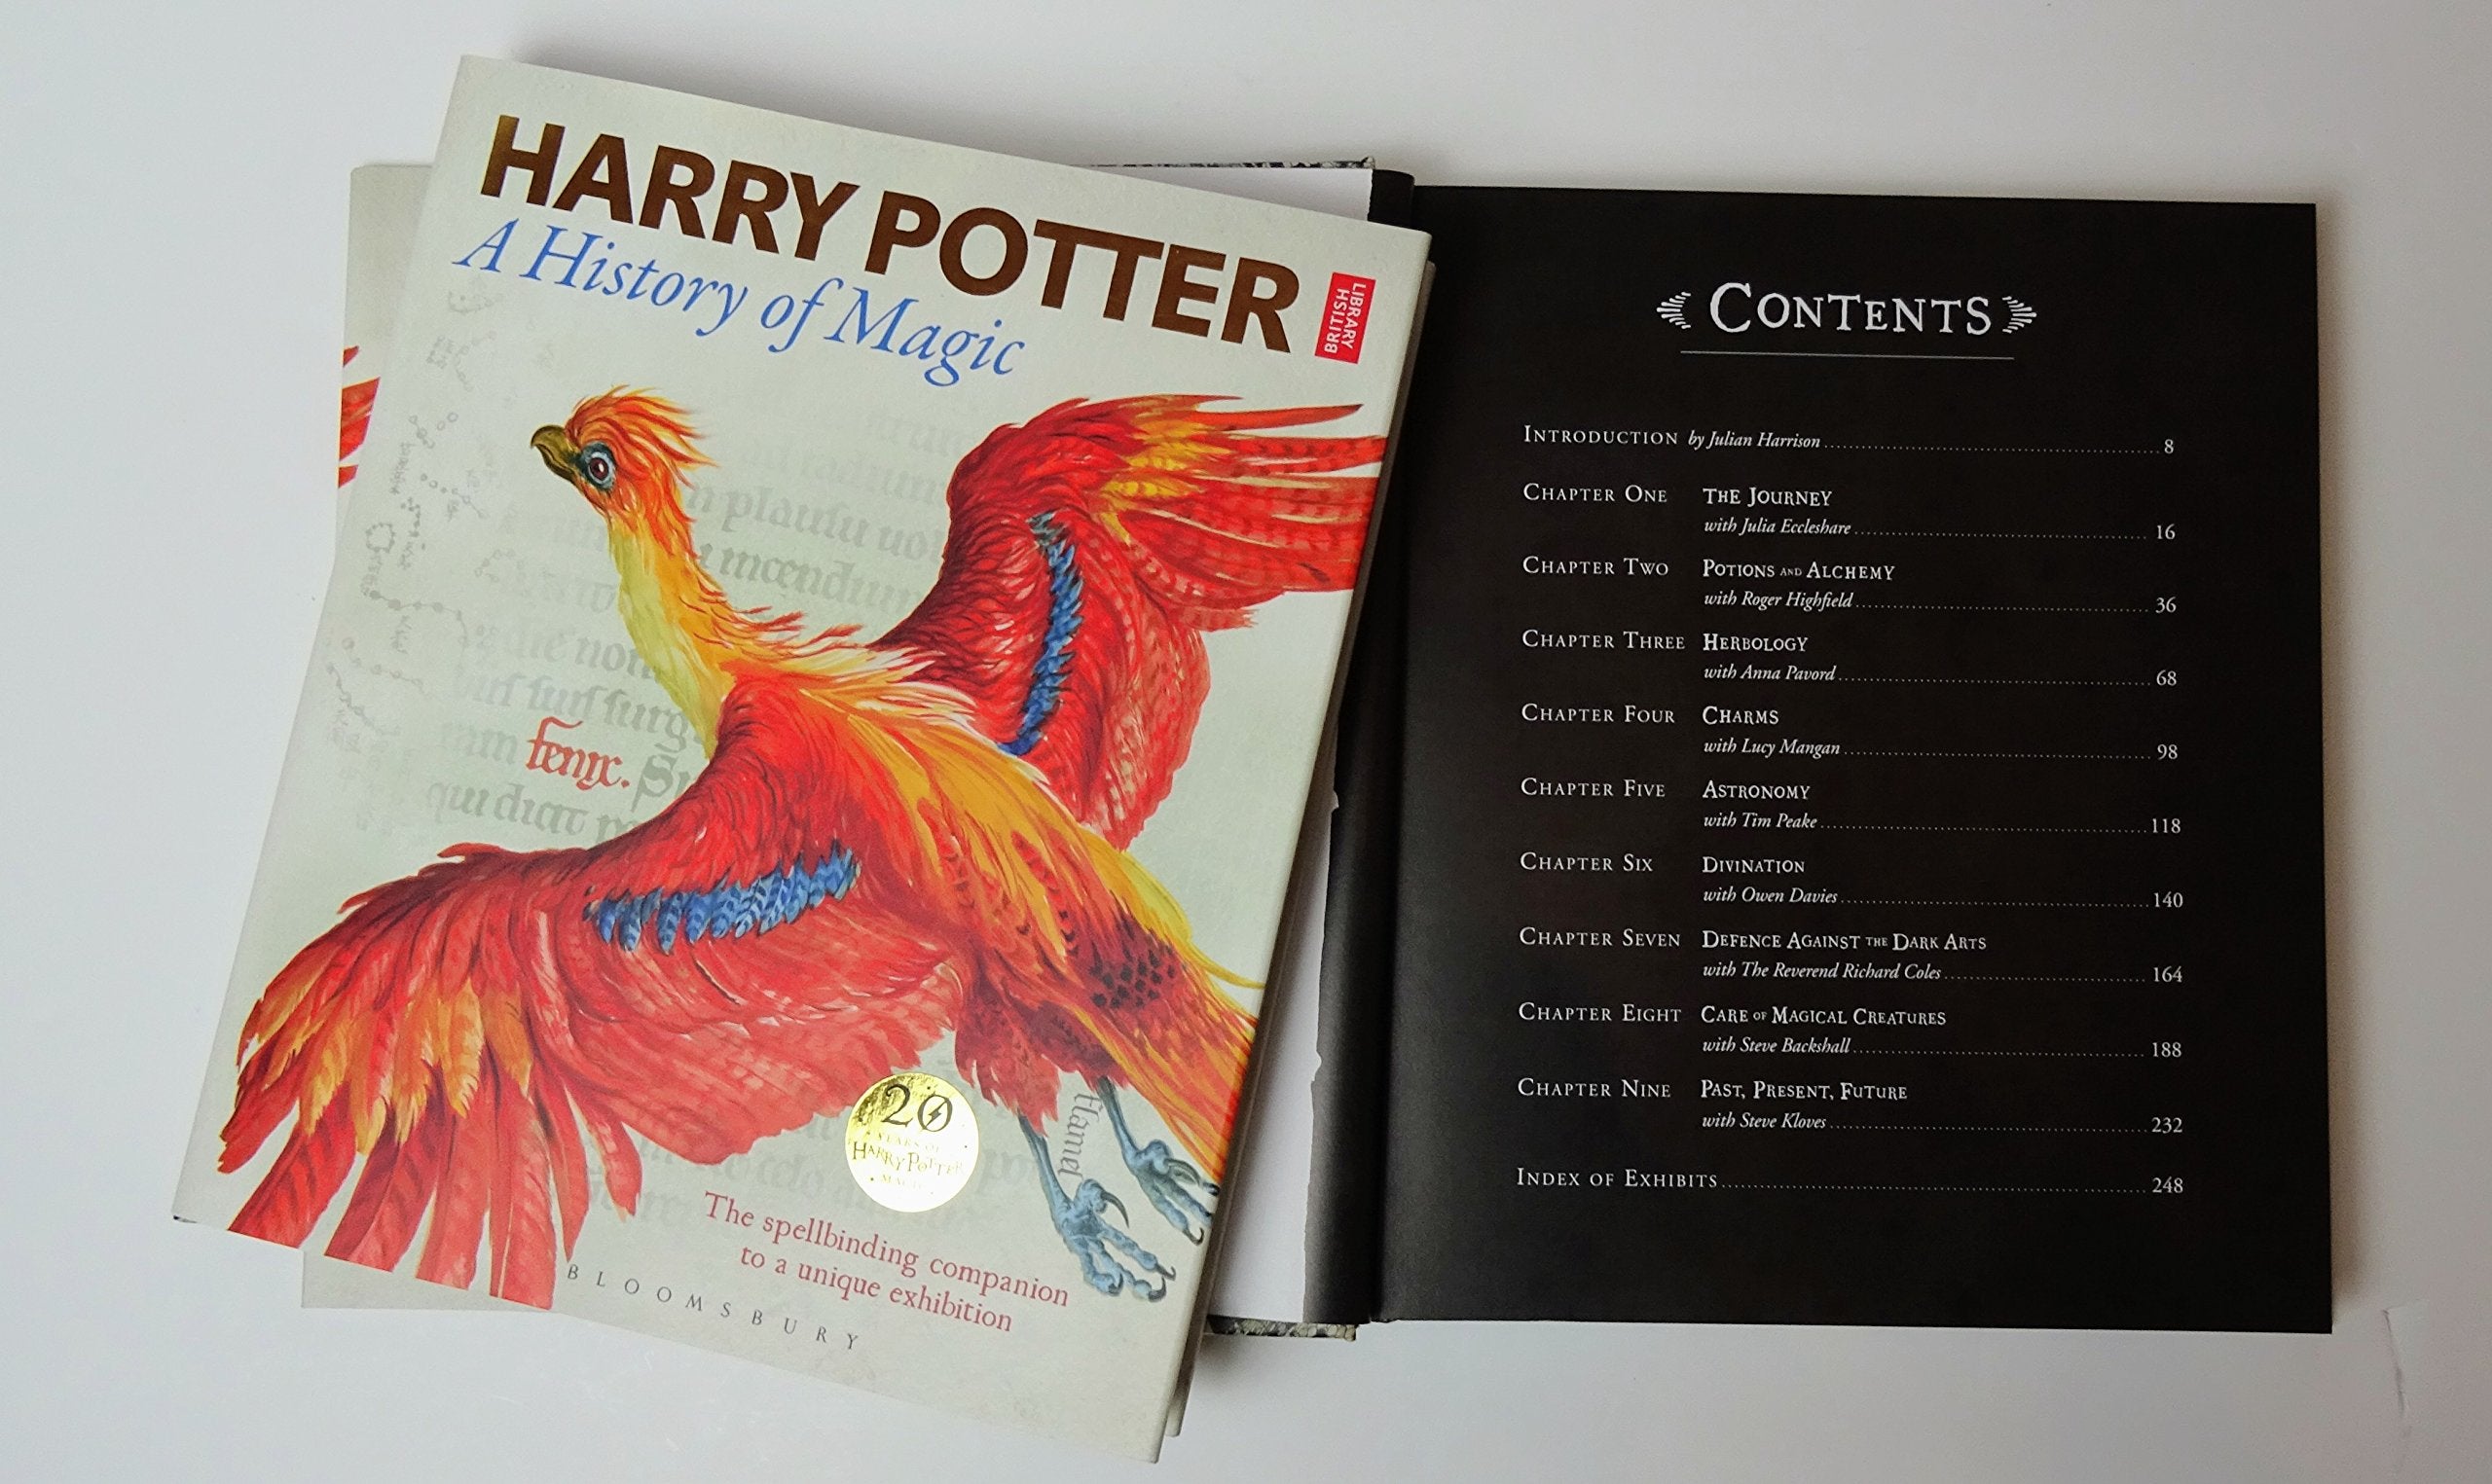 NEW BOOK HARRY POTTER-A HISTORY OF MAGIC